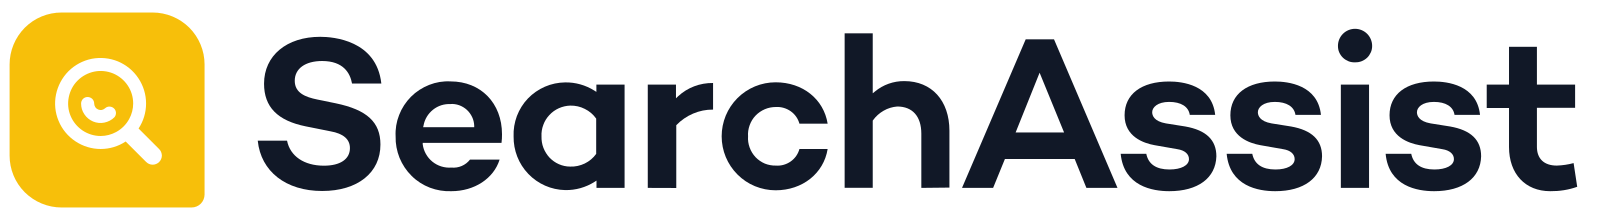 SearchAssist-Text